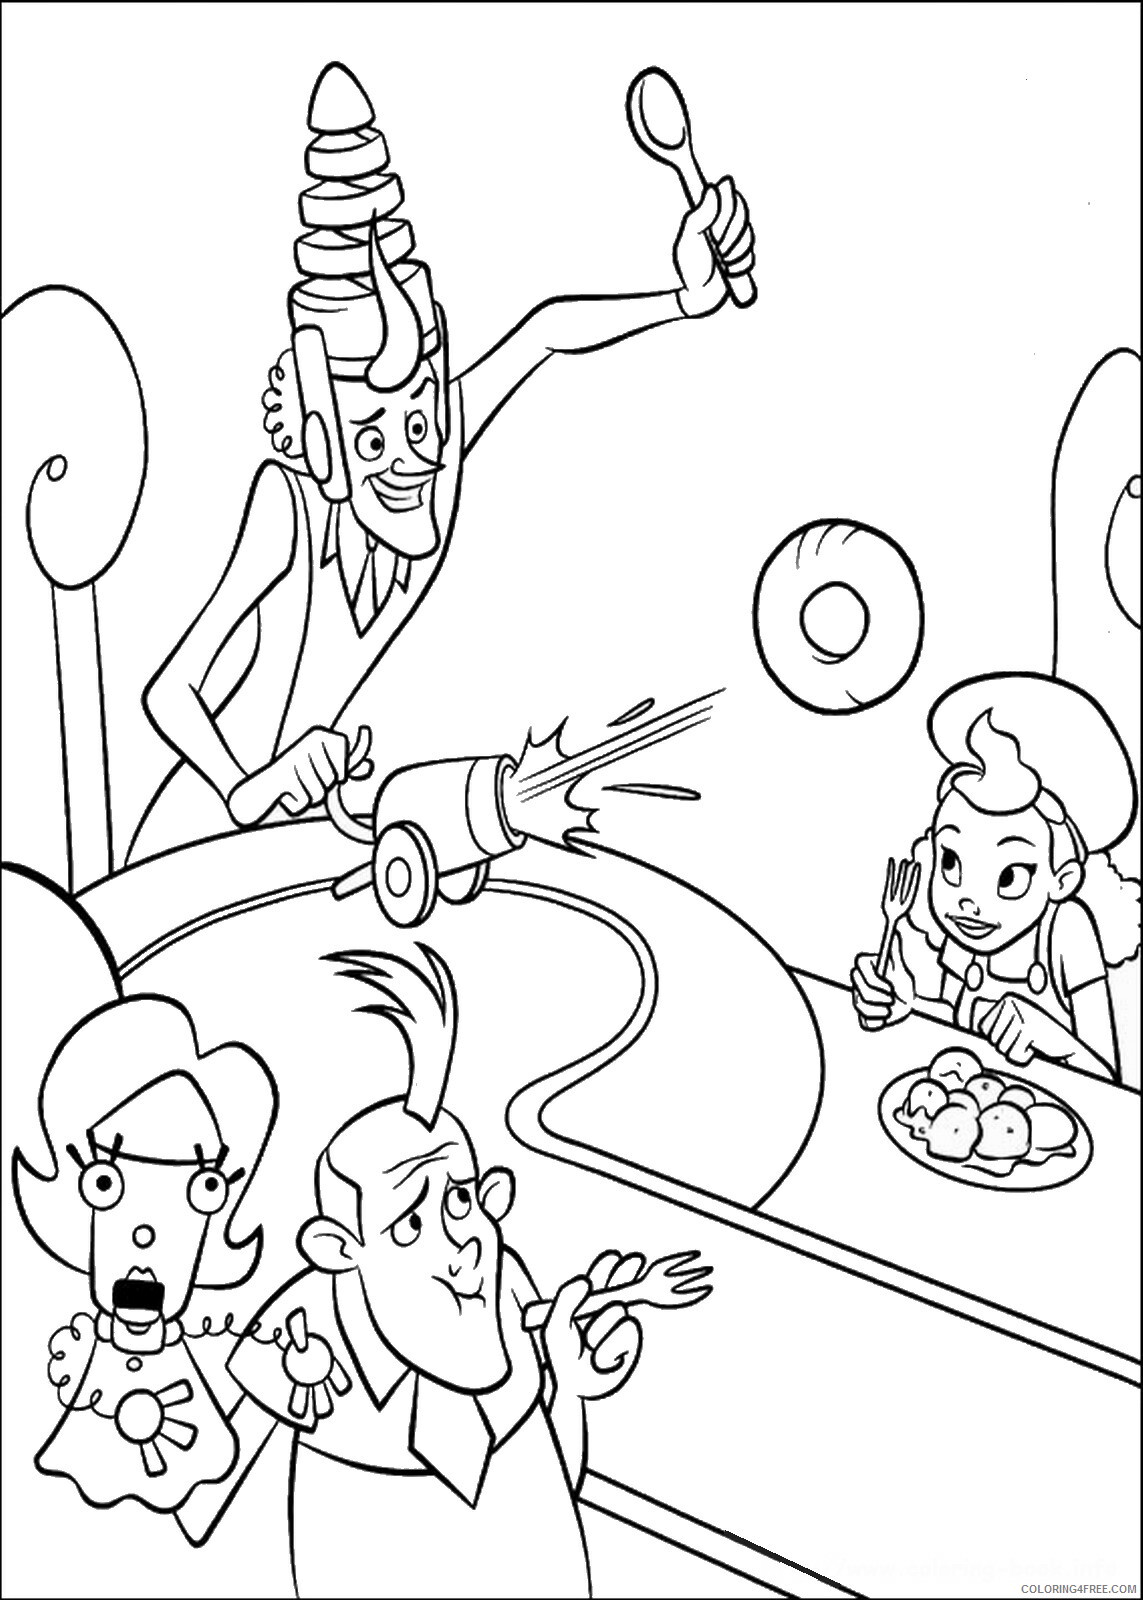 Meet the Robinsons Coloring Pages TV Film meet_the_robinsons Printable 2020 04948 Coloring4free